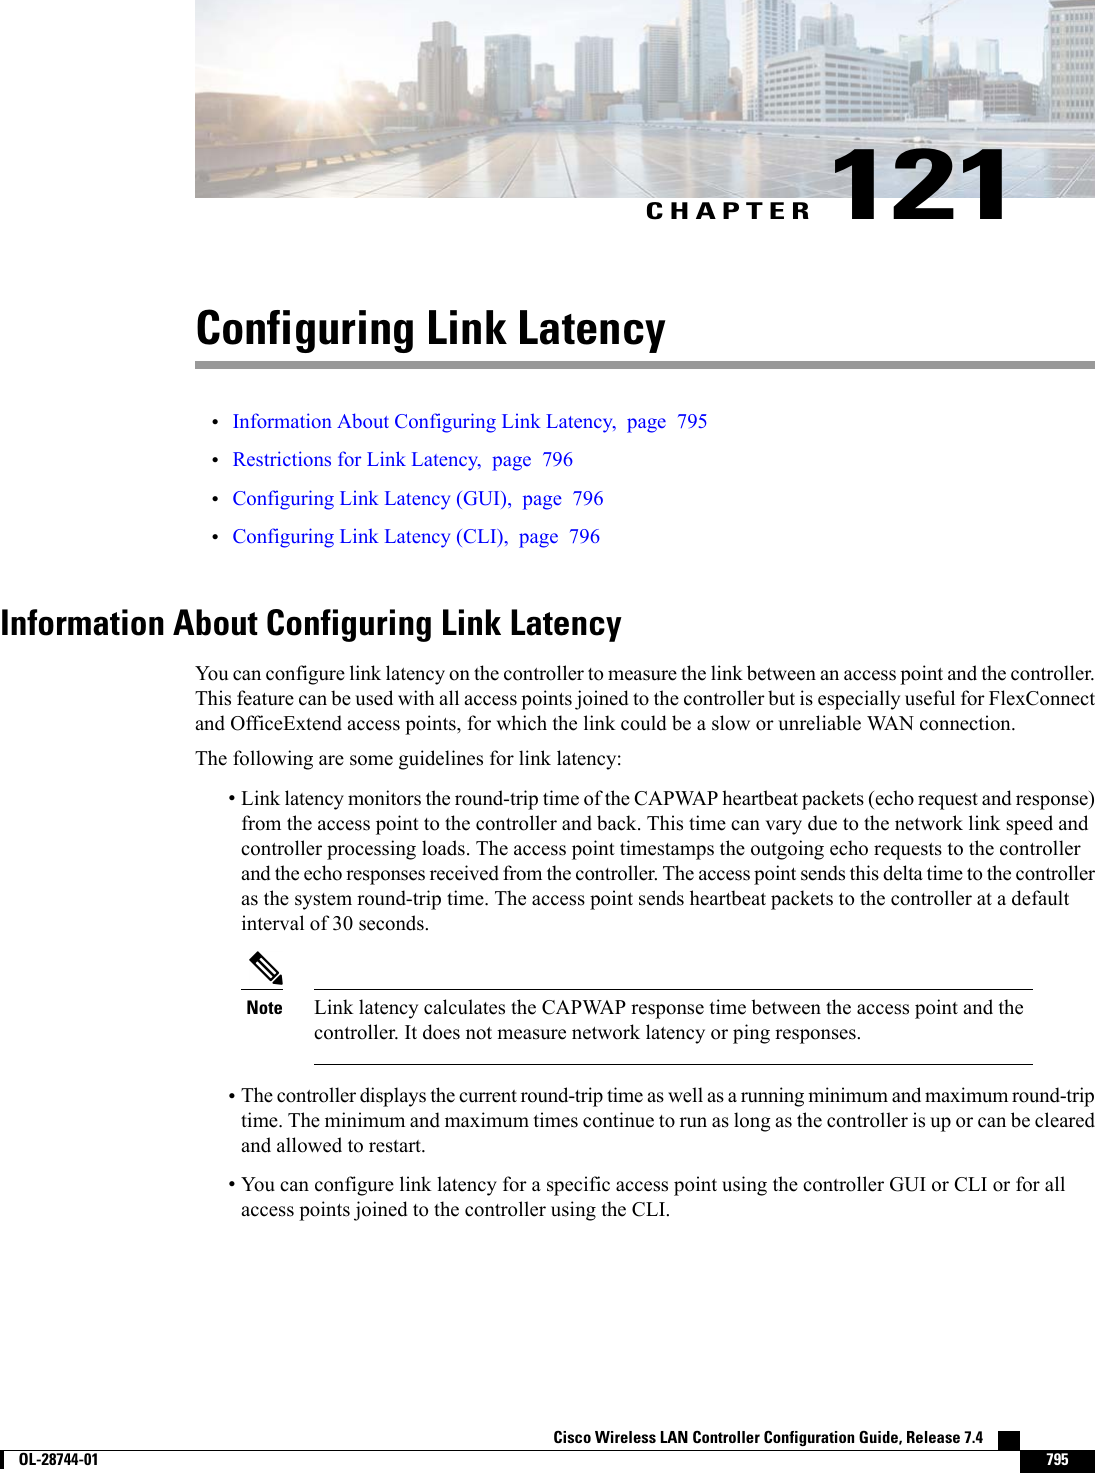 CHAPTER 121Configuring Link Latency•Information About Configuring Link Latency, page 795•Restrictions for Link Latency, page 796•Configuring Link Latency (GUI), page 796•Configuring Link Latency (CLI), page 796Information About Configuring Link LatencyYou can configure link latency on the controller to measure the link between an access point and the controller.This feature can be used with all access points joined to the controller but is especially useful for FlexConnectand OfficeExtend access points, for which the link could be a slow or unreliable WAN connection.The following are some guidelines for link latency:•Link latency monitors the round-trip time of the CAPWAP heartbeat packets (echo request and response)from the access point to the controller and back. This time can vary due to the network link speed andcontroller processing loads. The access point timestamps the outgoing echo requests to the controllerand the echo responses received from the controller. The access point sends this delta time to the controlleras the system round-trip time. The access point sends heartbeat packets to the controller at a defaultinterval of 30 seconds.Link latency calculates the CAPWAP response time between the access point and thecontroller. It does not measure network latency or ping responses.Note•The controller displays the current round-trip time as well as a running minimum and maximum round-triptime. The minimum and maximum times continue to run as long as the controller is up or can be clearedand allowed to restart.•You can configure link latency for a specific access point using the controller GUI or CLI or for allaccess points joined to the controller using the CLI.Cisco Wireless LAN Controller Configuration Guide, Release 7.4        OL-28744-01 795